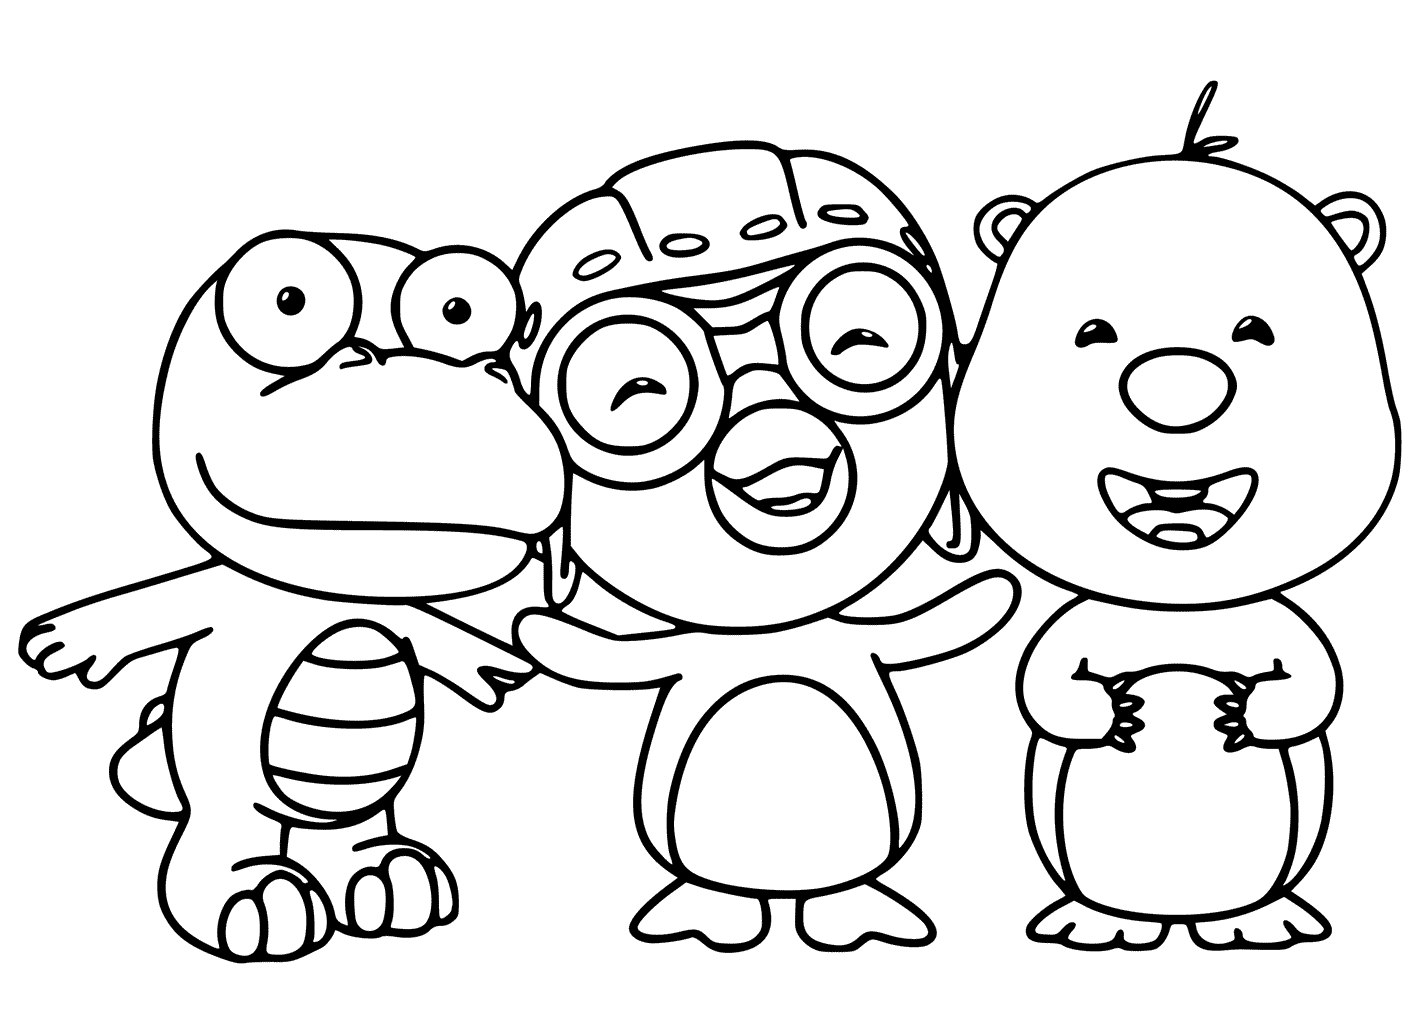 Pororo Coloring Pages at GetDrawings | Free download